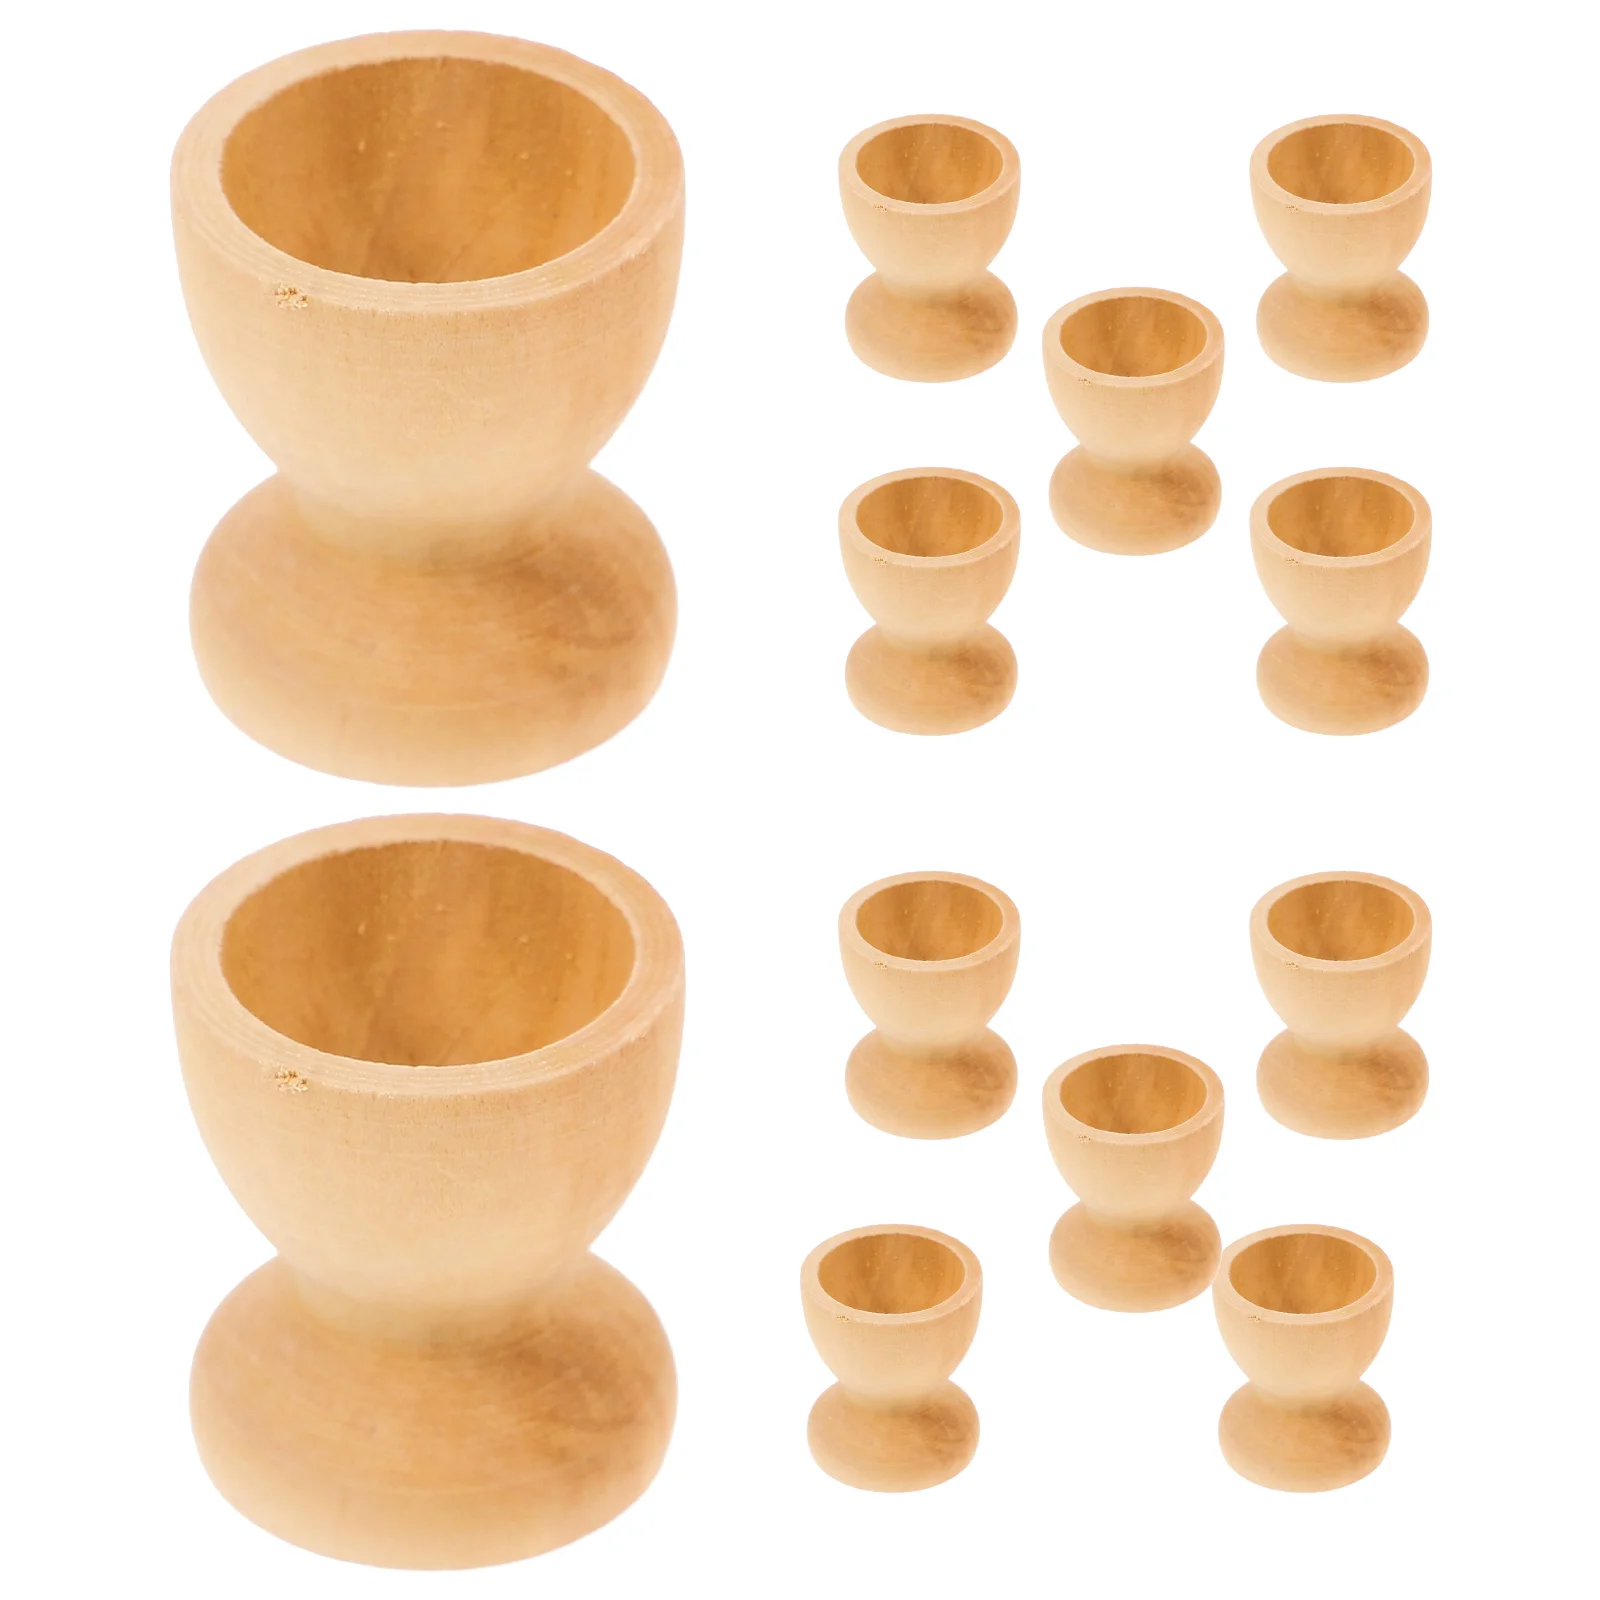 

Egg Holder Wooden Cup Easter Cups Stand Holders Tray Wood Eggs Display Breakfast Boiled Tools Kitchen Painting Unfinished